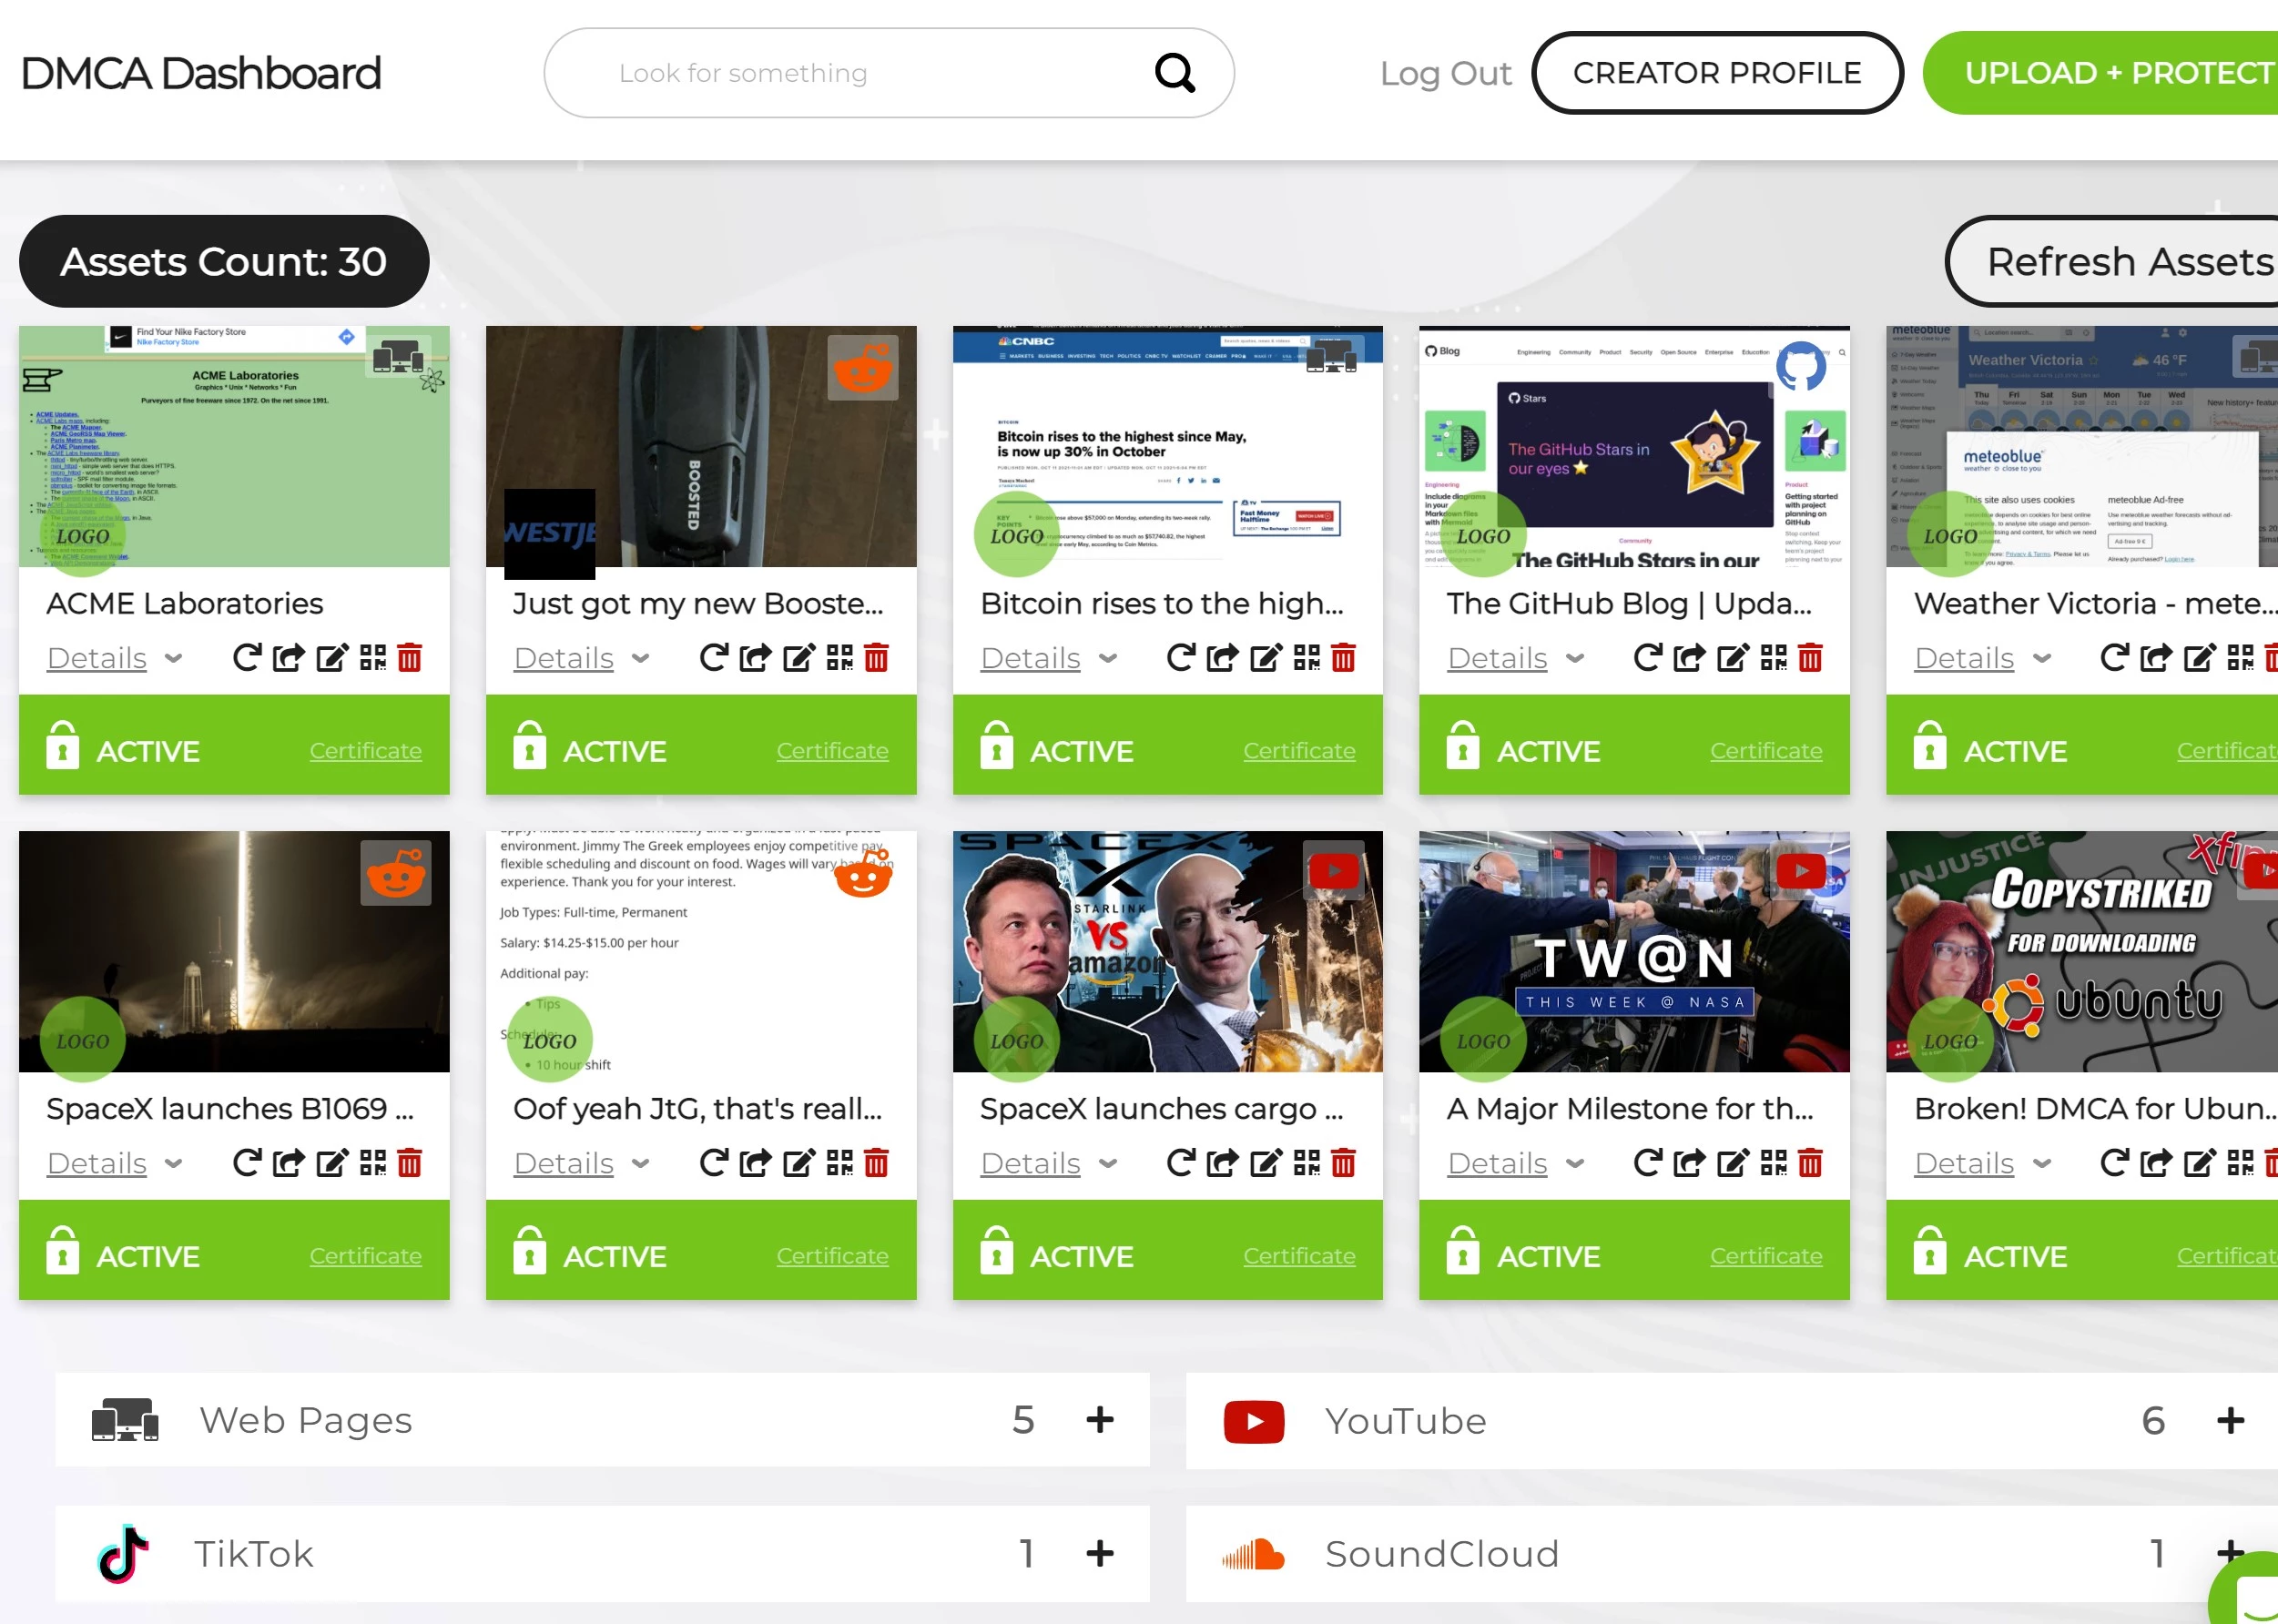 Take a look at the new DMCA Dashboard Preview